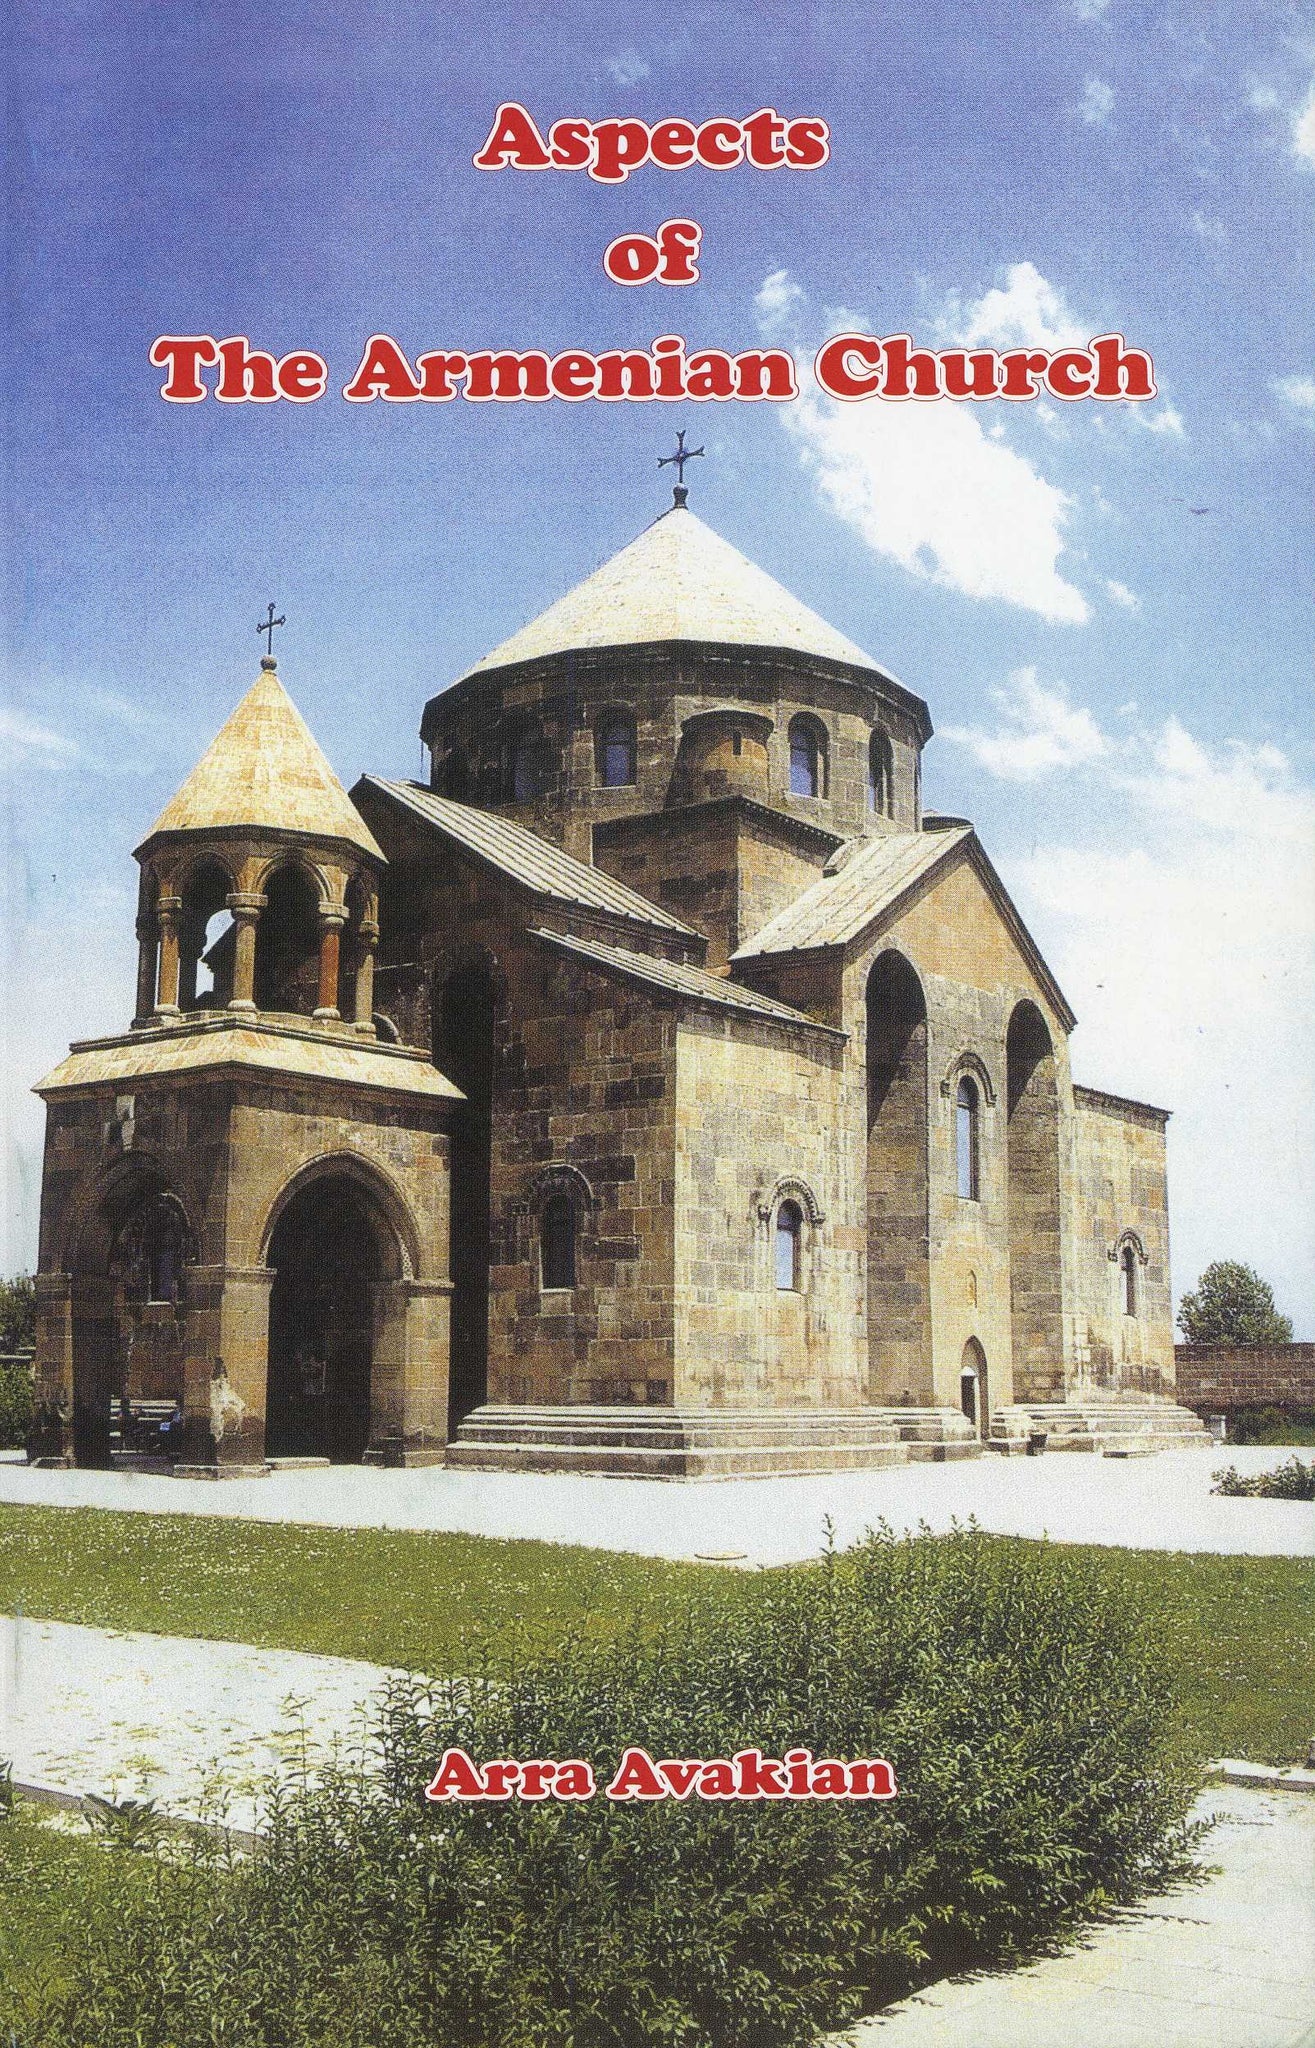 ASPECTS OF THE ARMENIAN CHURCH: Its History, Doctrine, Liturgy, and Personae